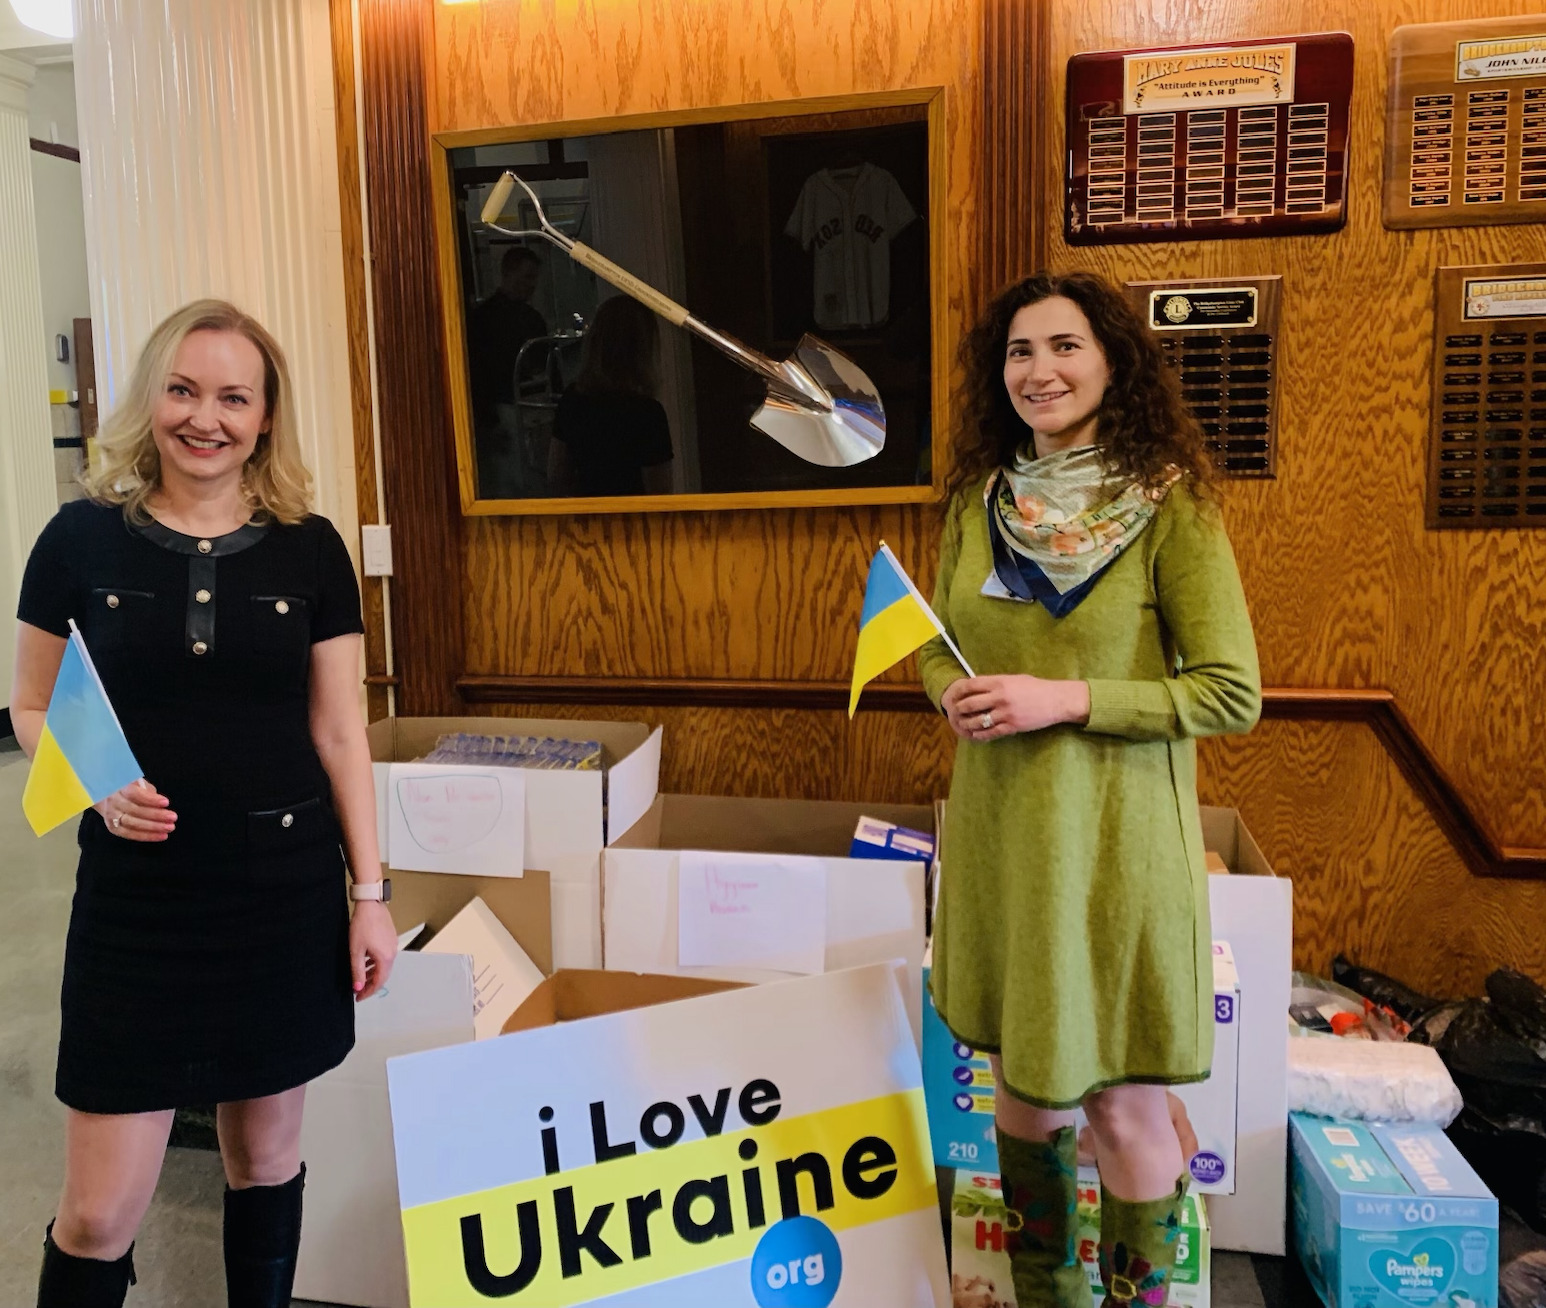 The Bridgehampton School National Junior Honor Society members, under adviser Maria Bouzos-Reilly, right, were instrumental in supporting the efforts of ILoveUkraine.org, founded by East End resident Natalie Massa, left, in response to the humanitarian disaster in the land of her birth, where her family and school friends are in need of basic necessities.